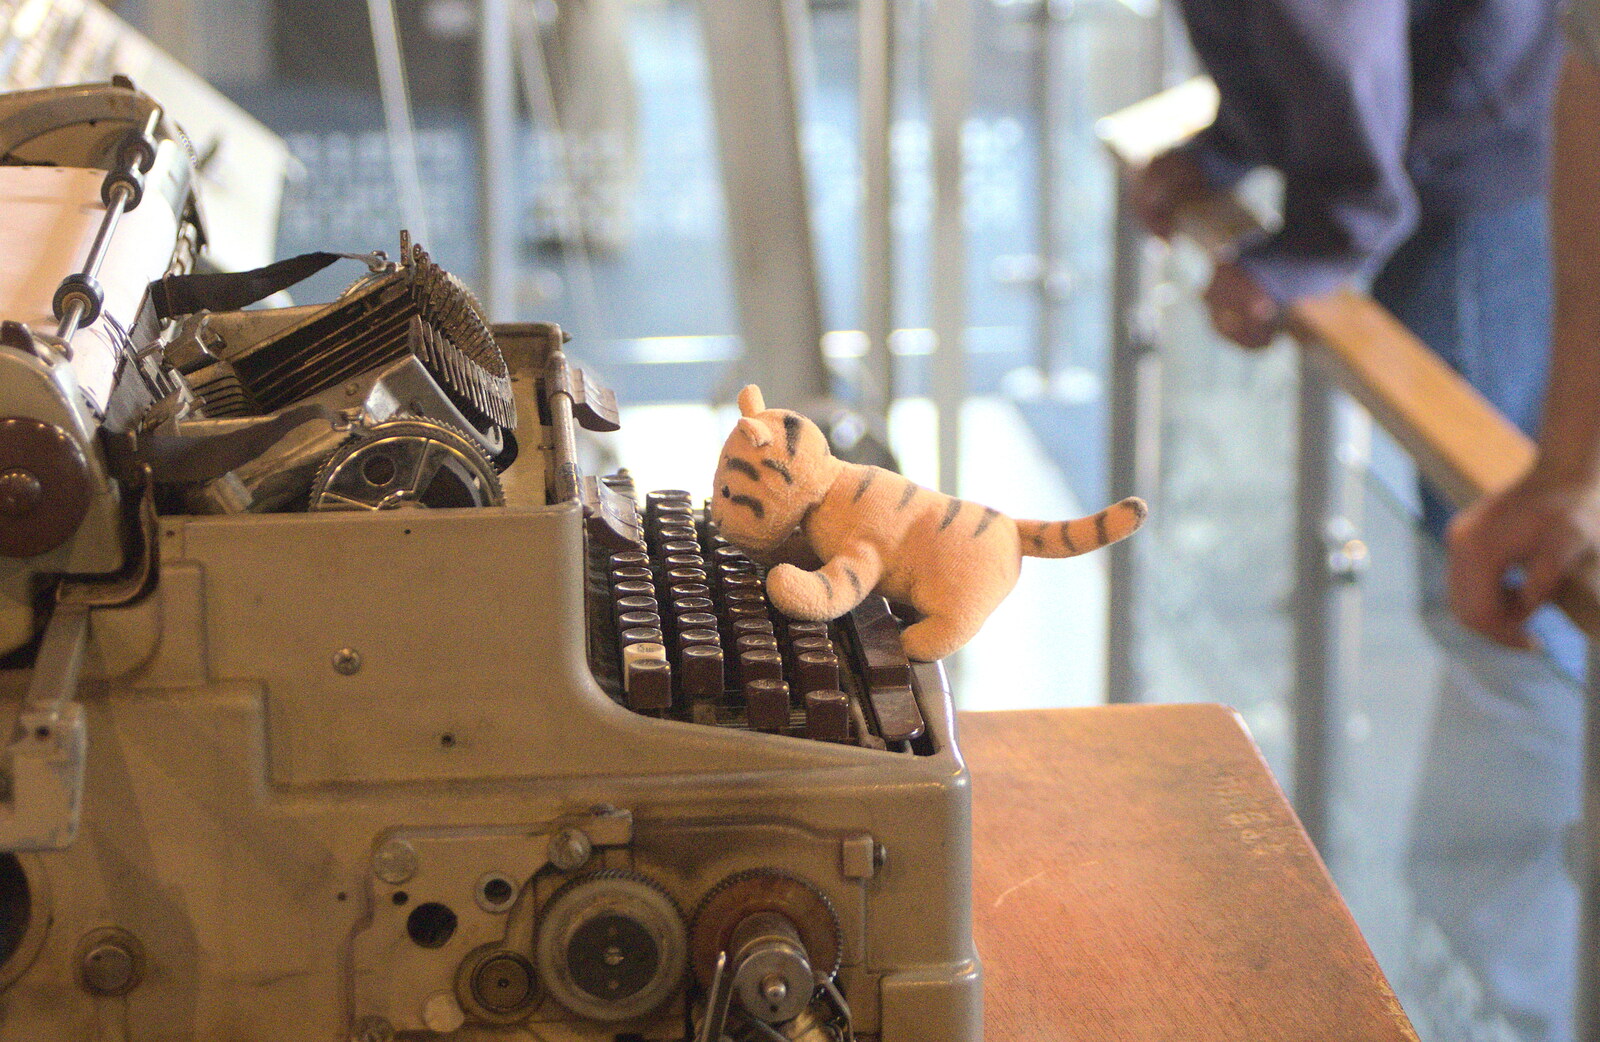 Chris's Tigger is on a typewriter from TouchType does Bletchley Park, Bletchley, Bedfordshire - 20th July 2012